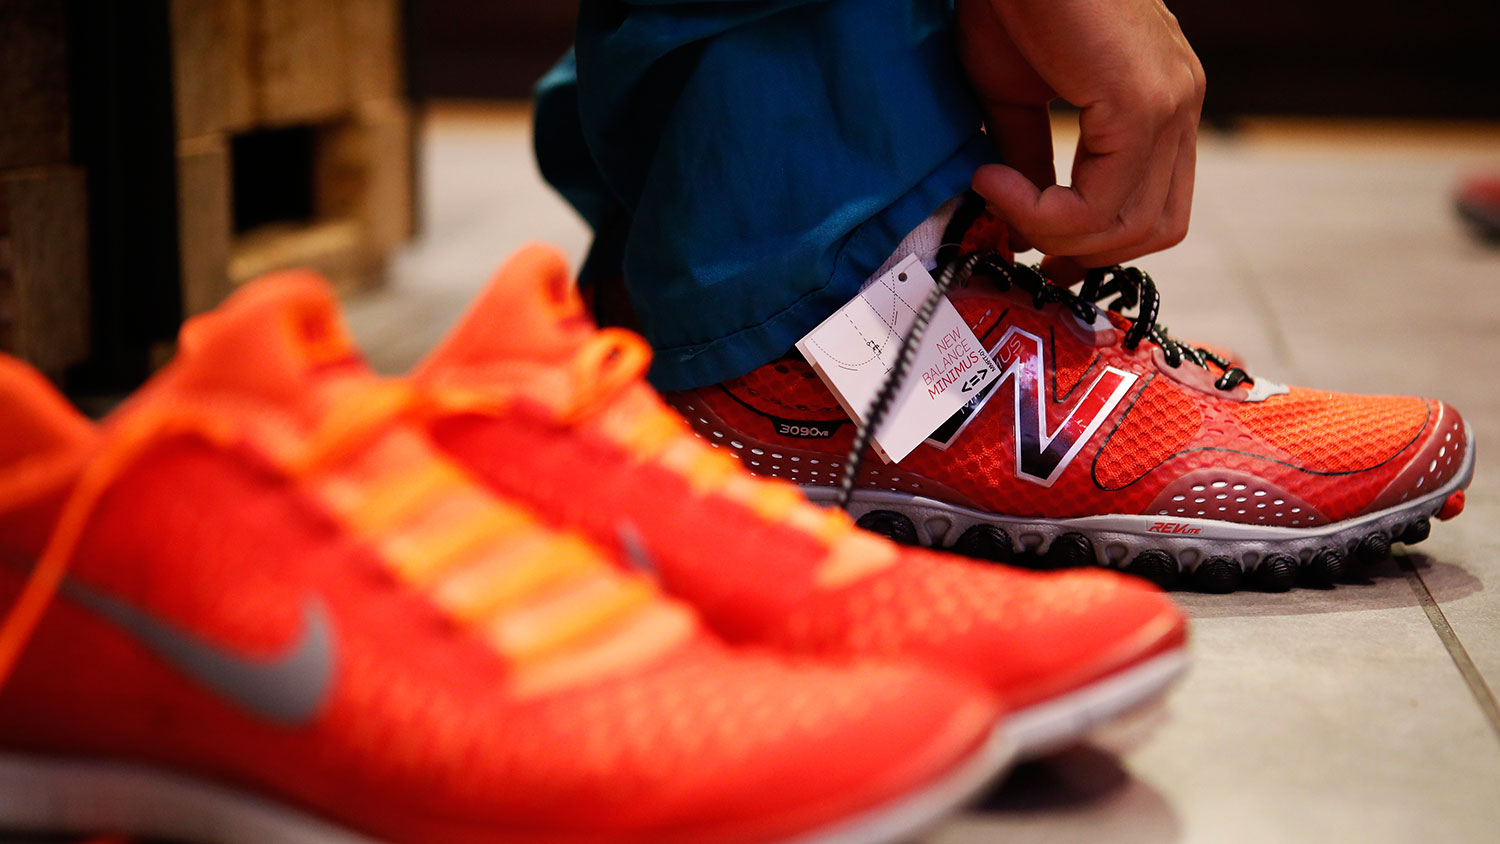 New Balance Close To Win In Buy-America Foot Race For Military - Bloomberg